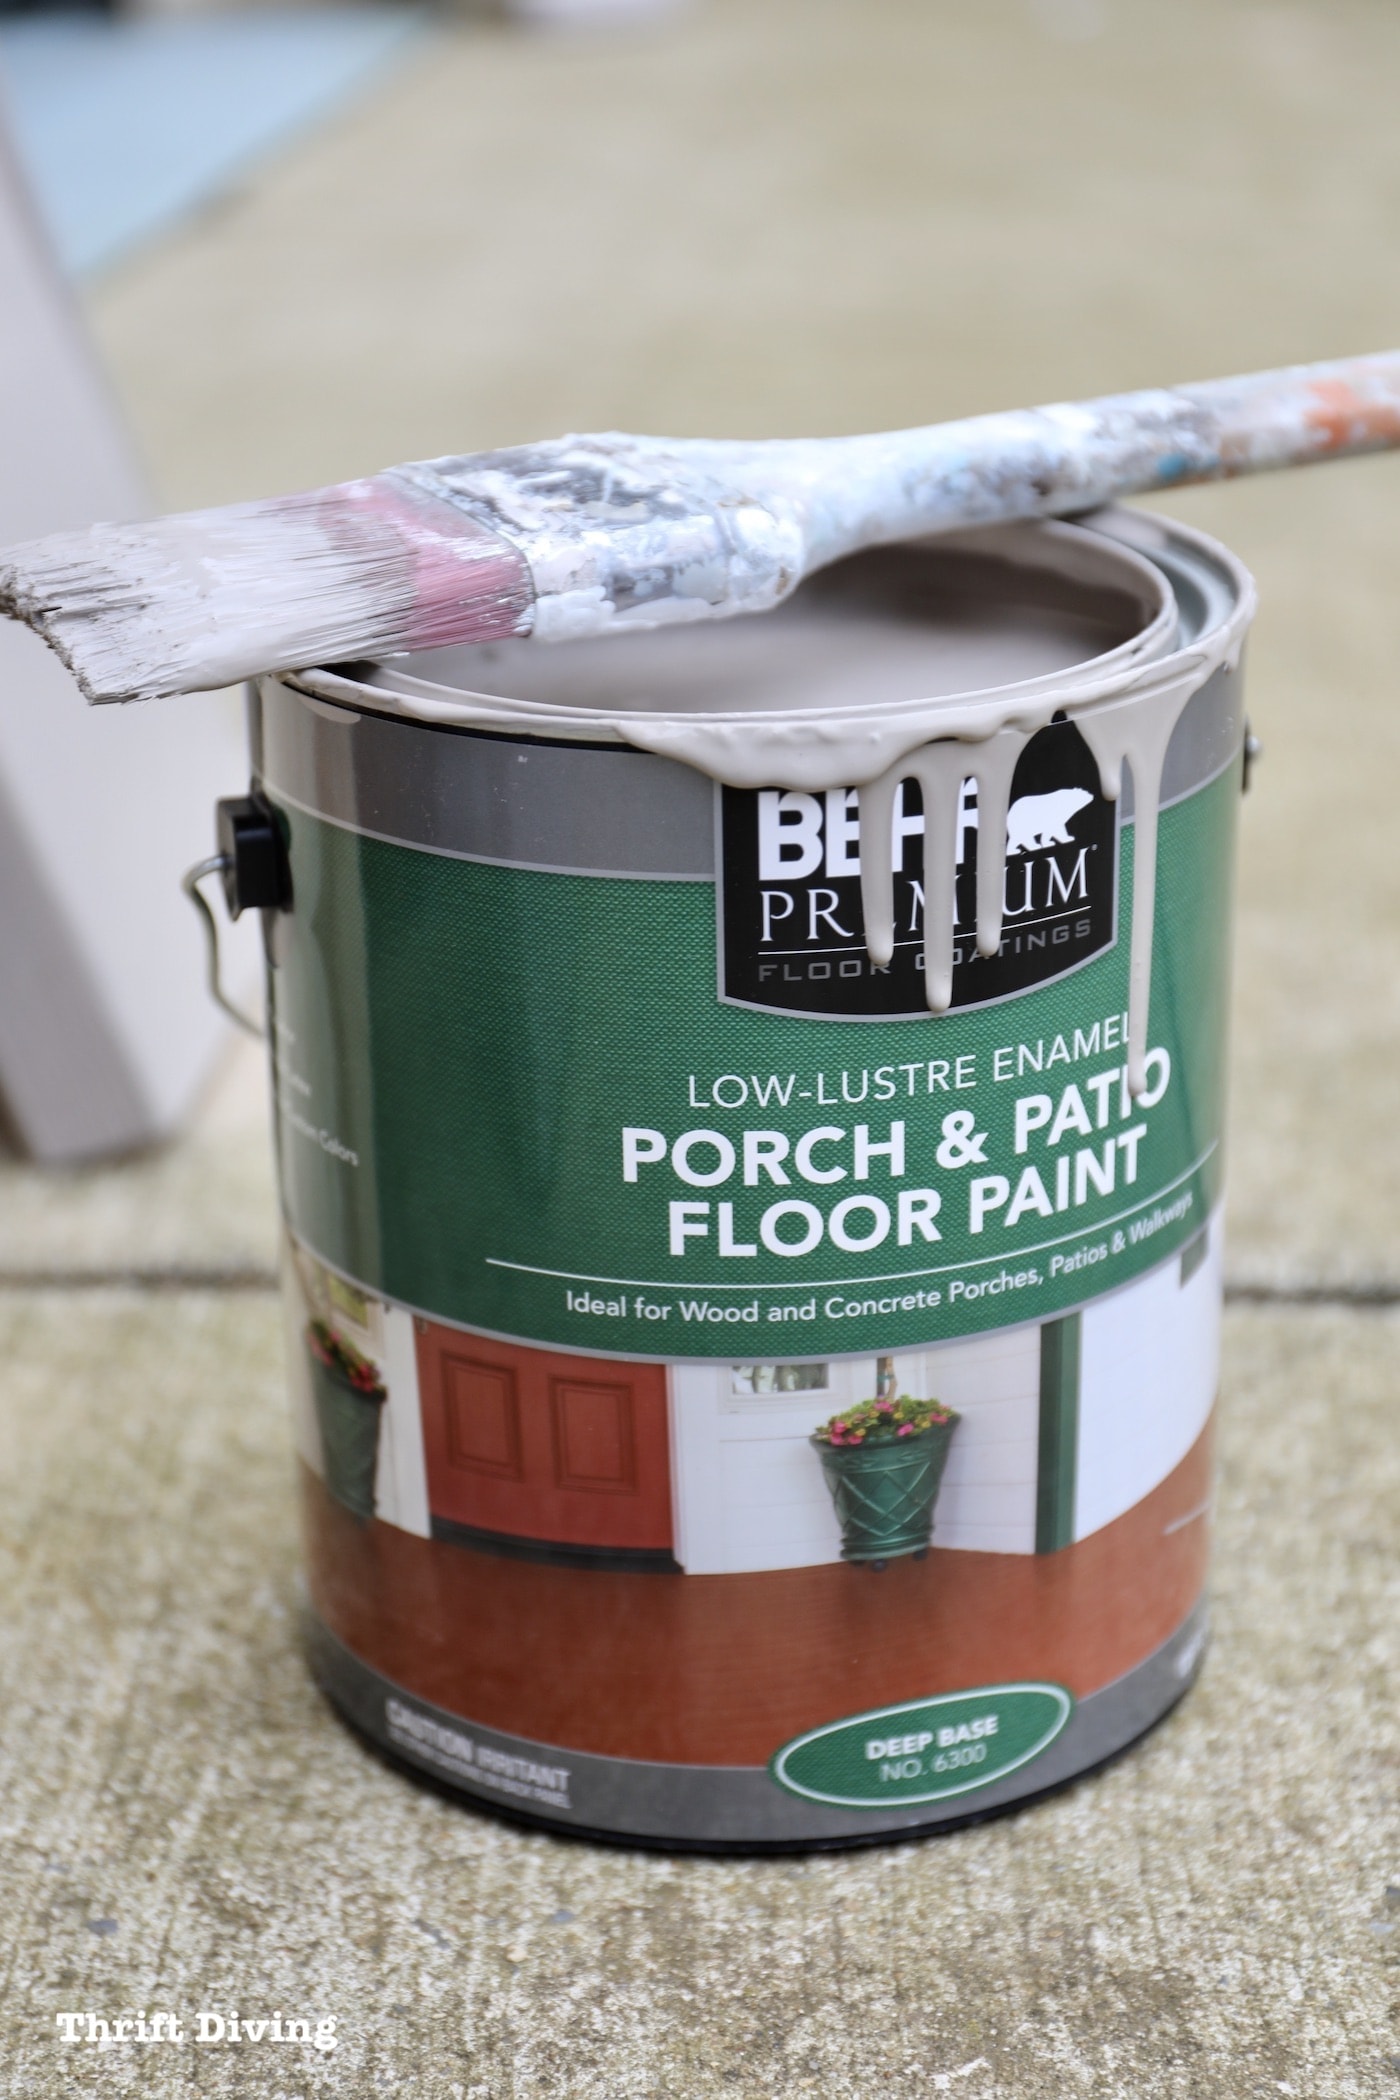 Use Behr Porch and Patio Floor Paint to paint areas like wood, concrete, porches, patios, and more. - Thrift Diving